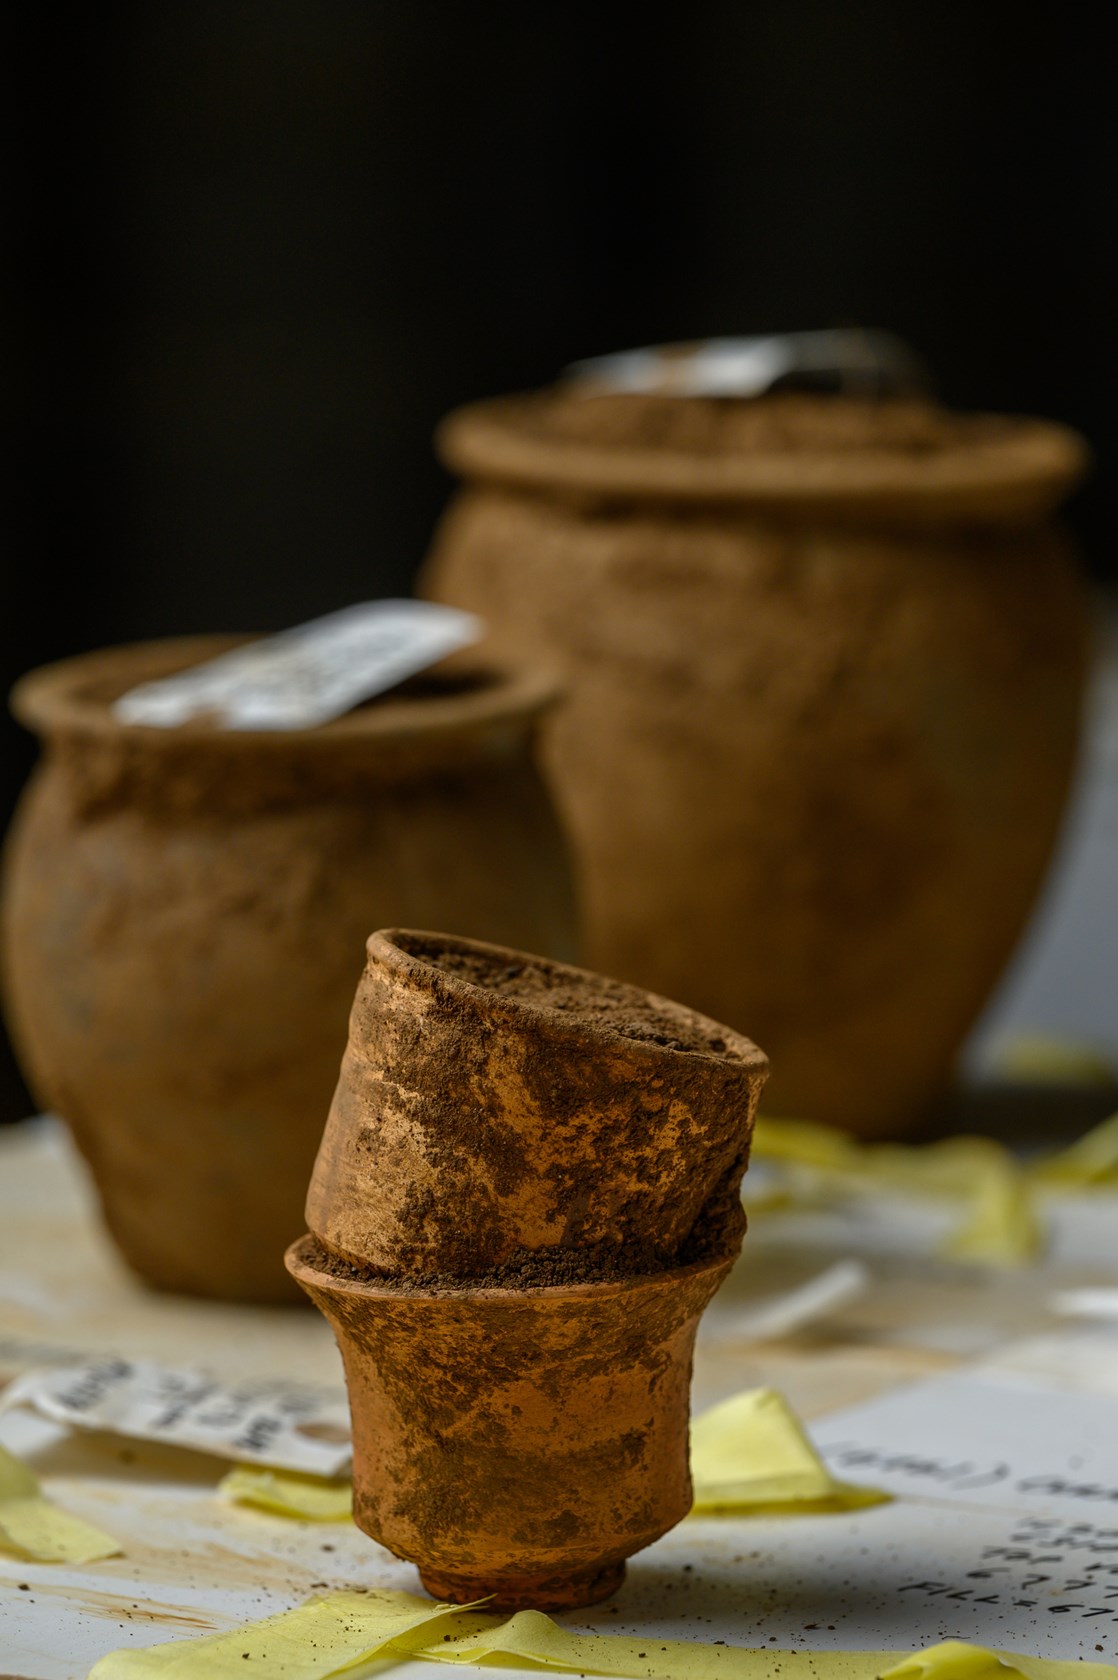 Roman cremation urns uncovered during the archaeology excavation at Blackgrounds, Chipping Warden, Northamptonshire-11